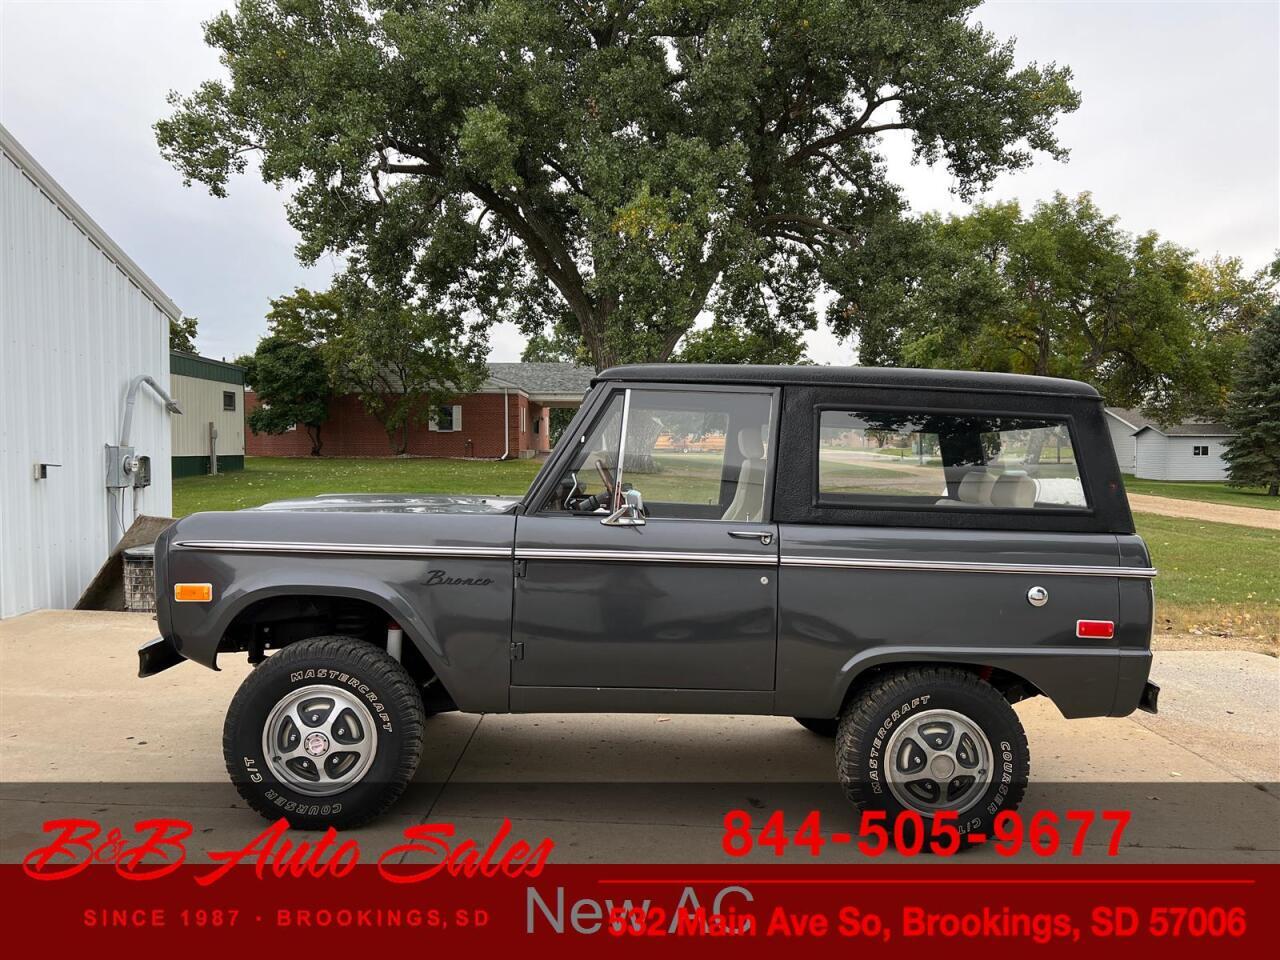 1976 Ford Bronco 4